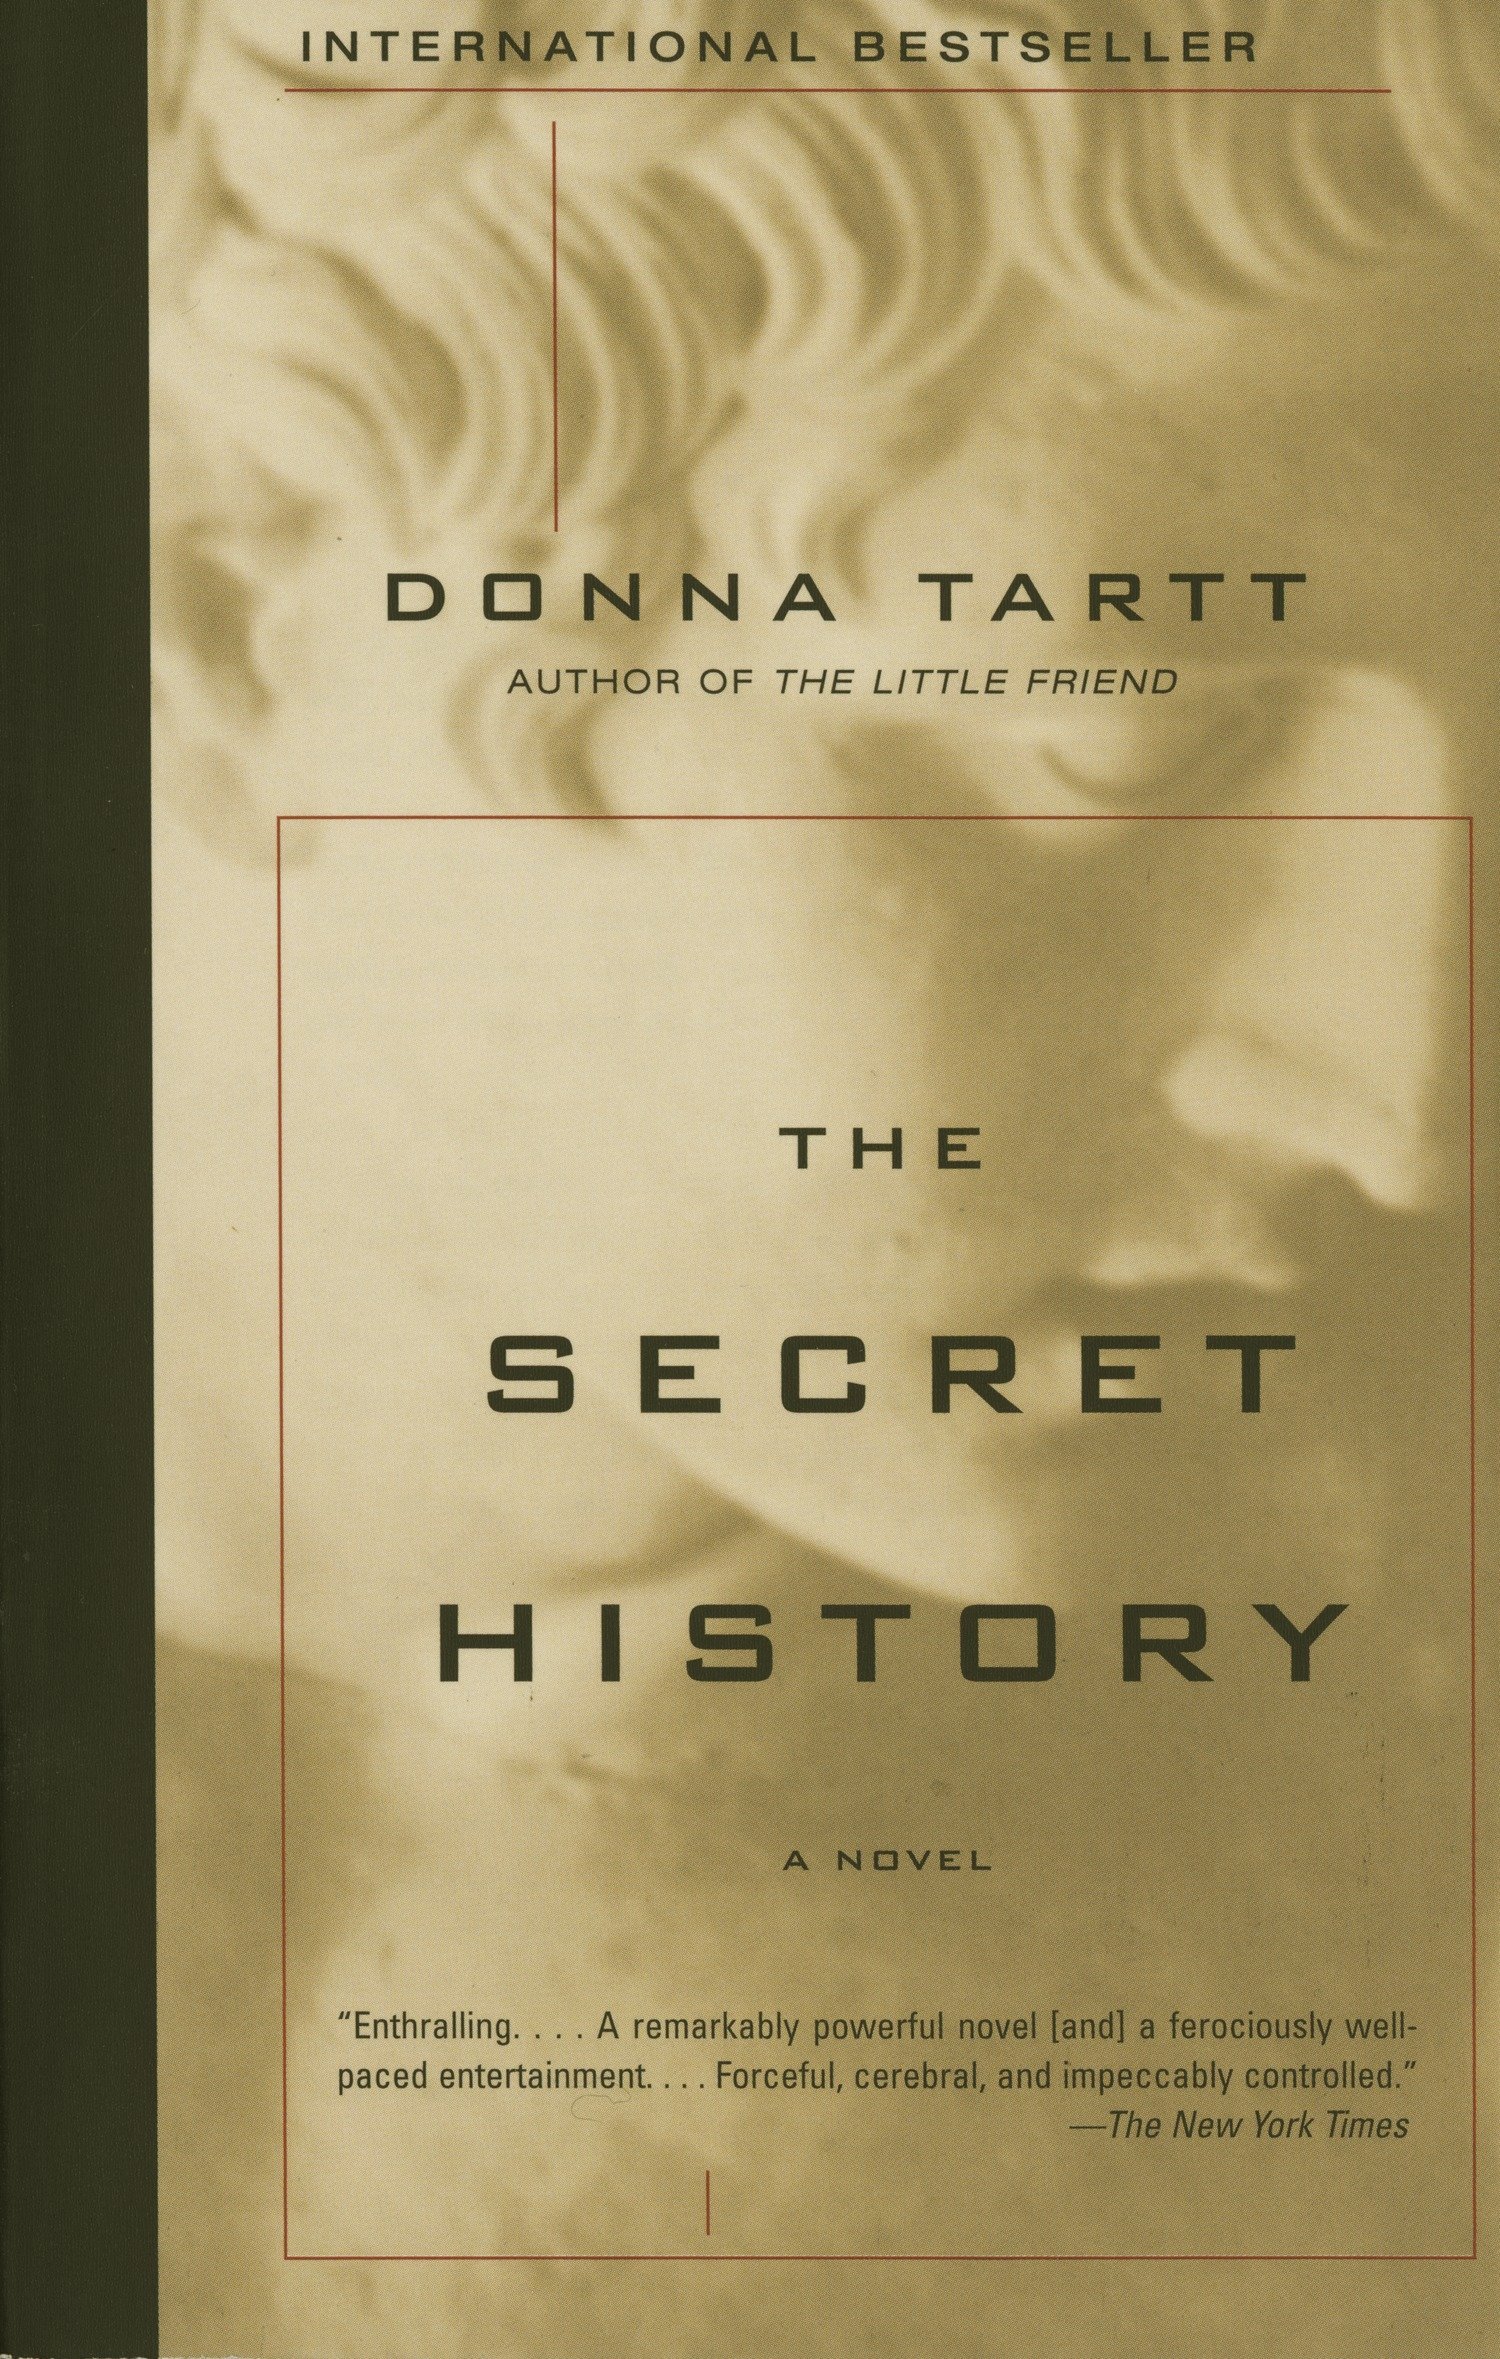 The cover of The Secret History by Donna Tartt